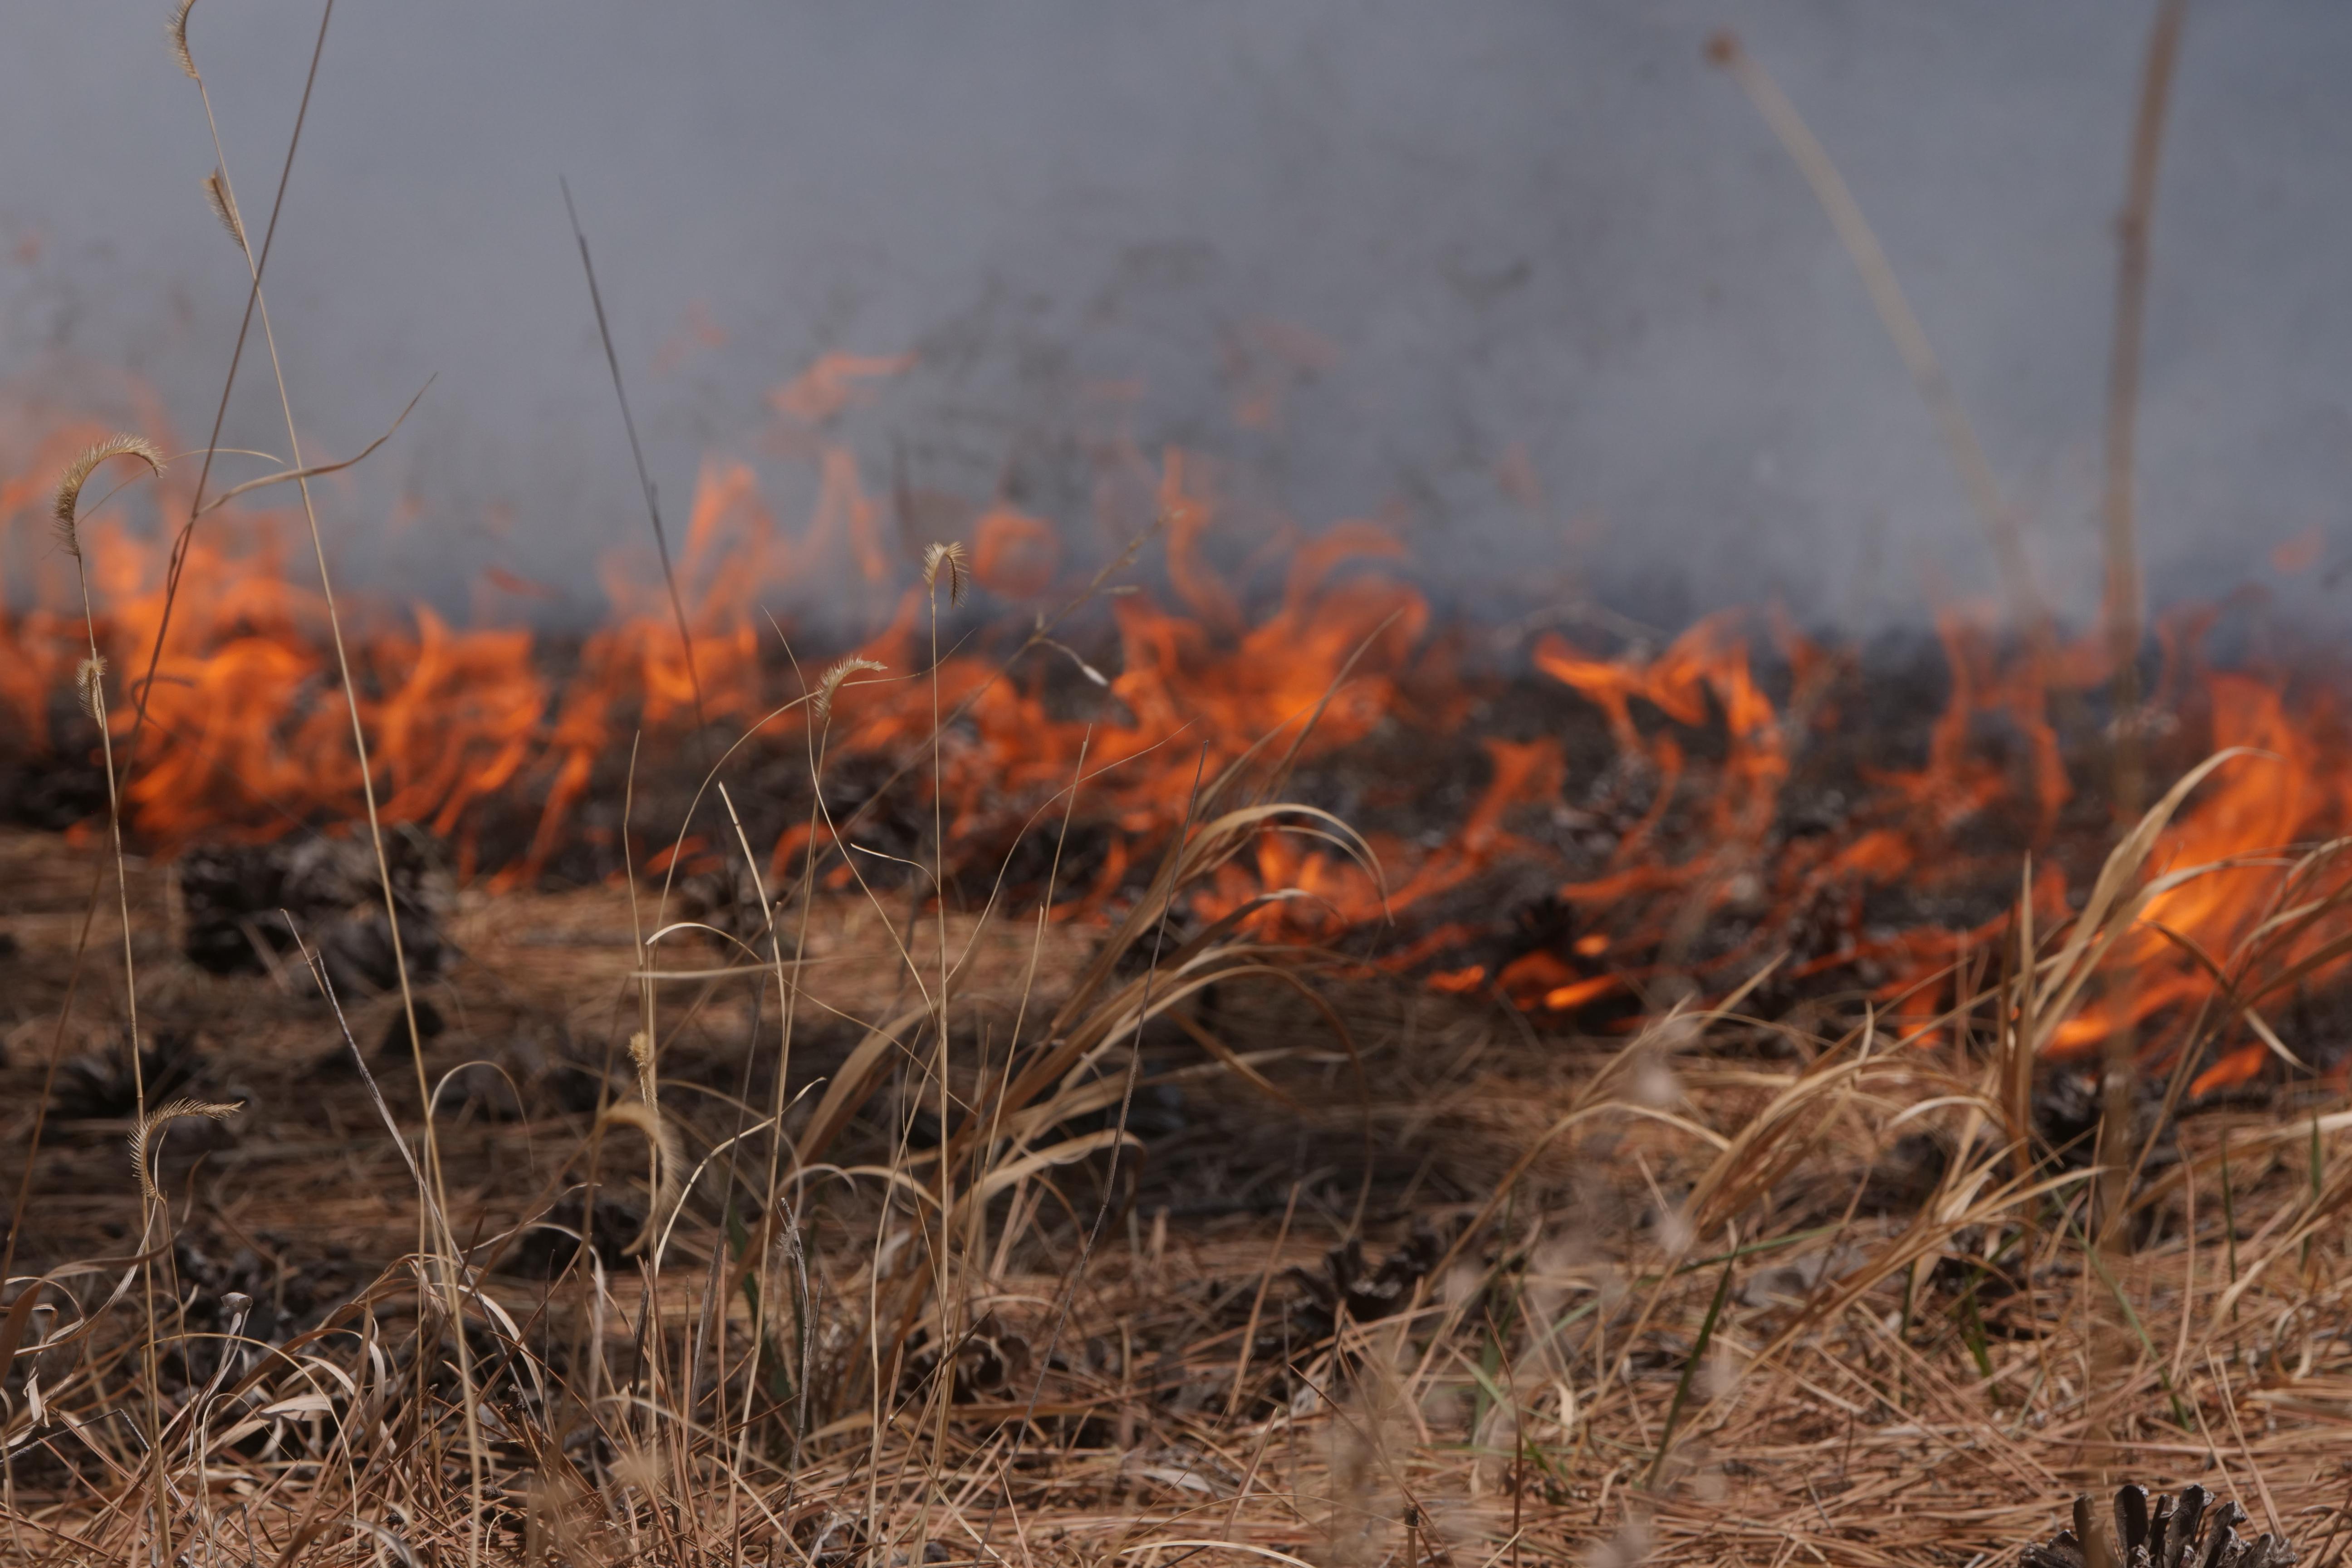 A close up picture of orange flames burning brown grasses.